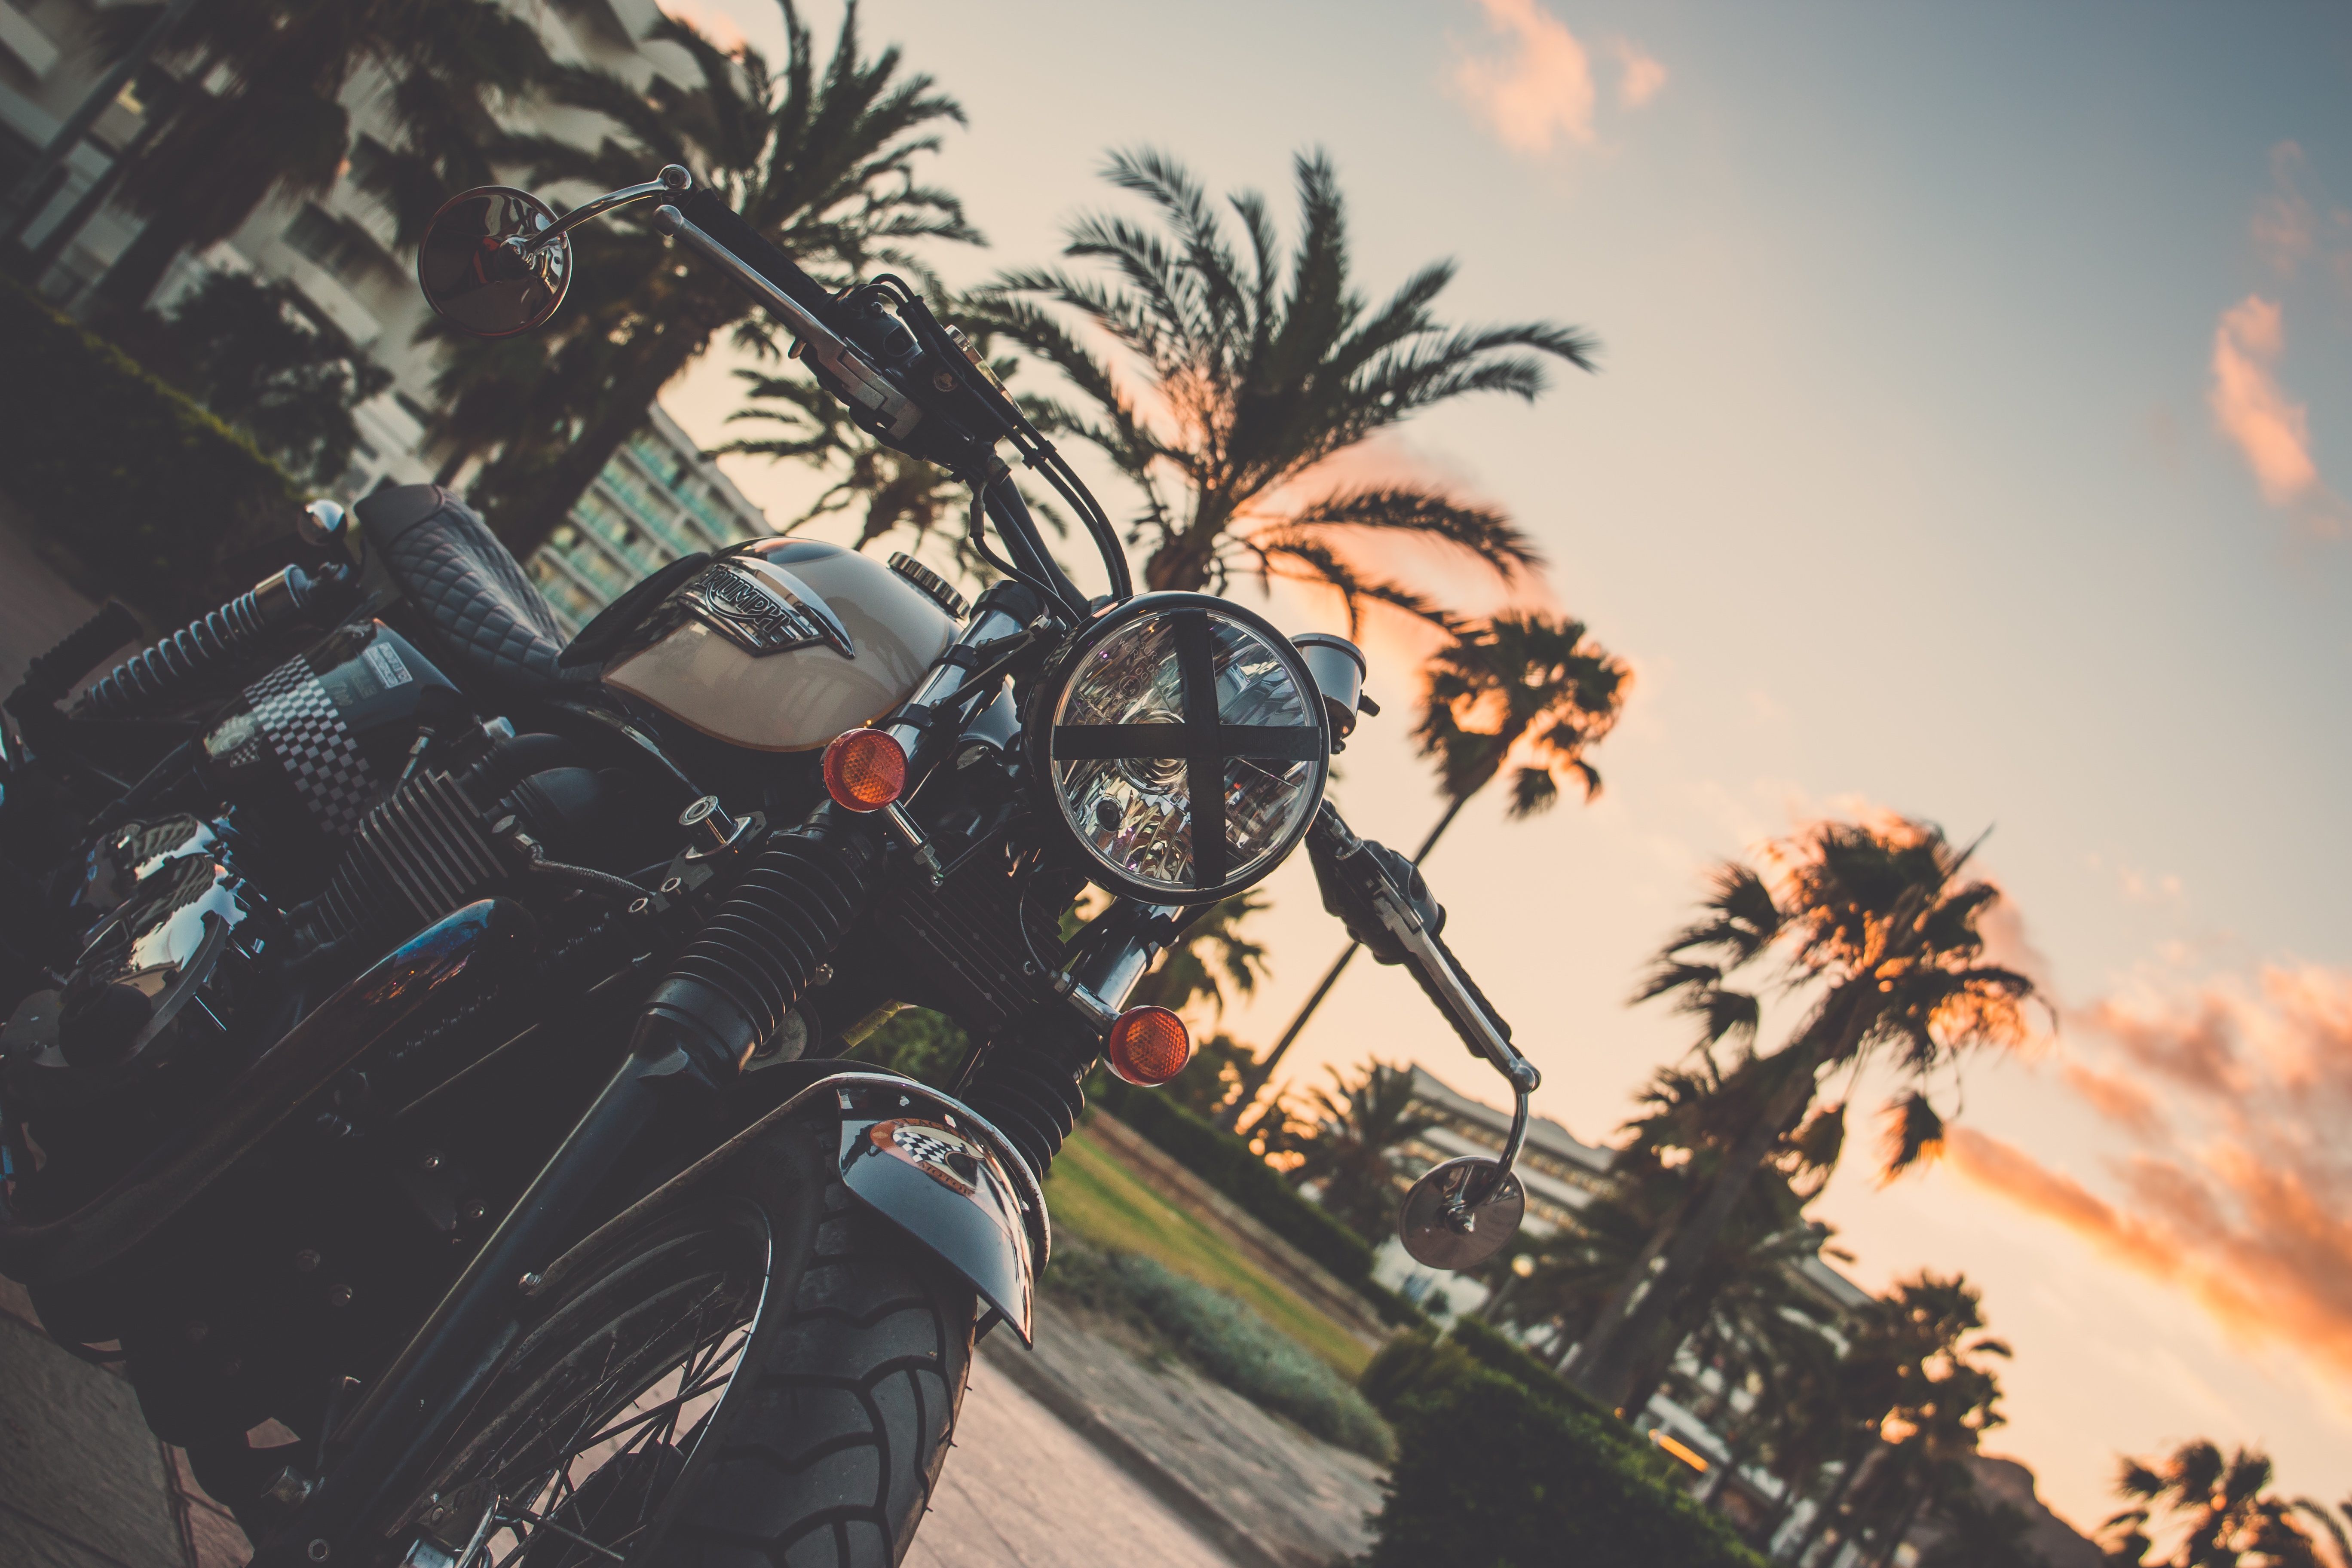 Motorcycles Wallpaper for desktop devices